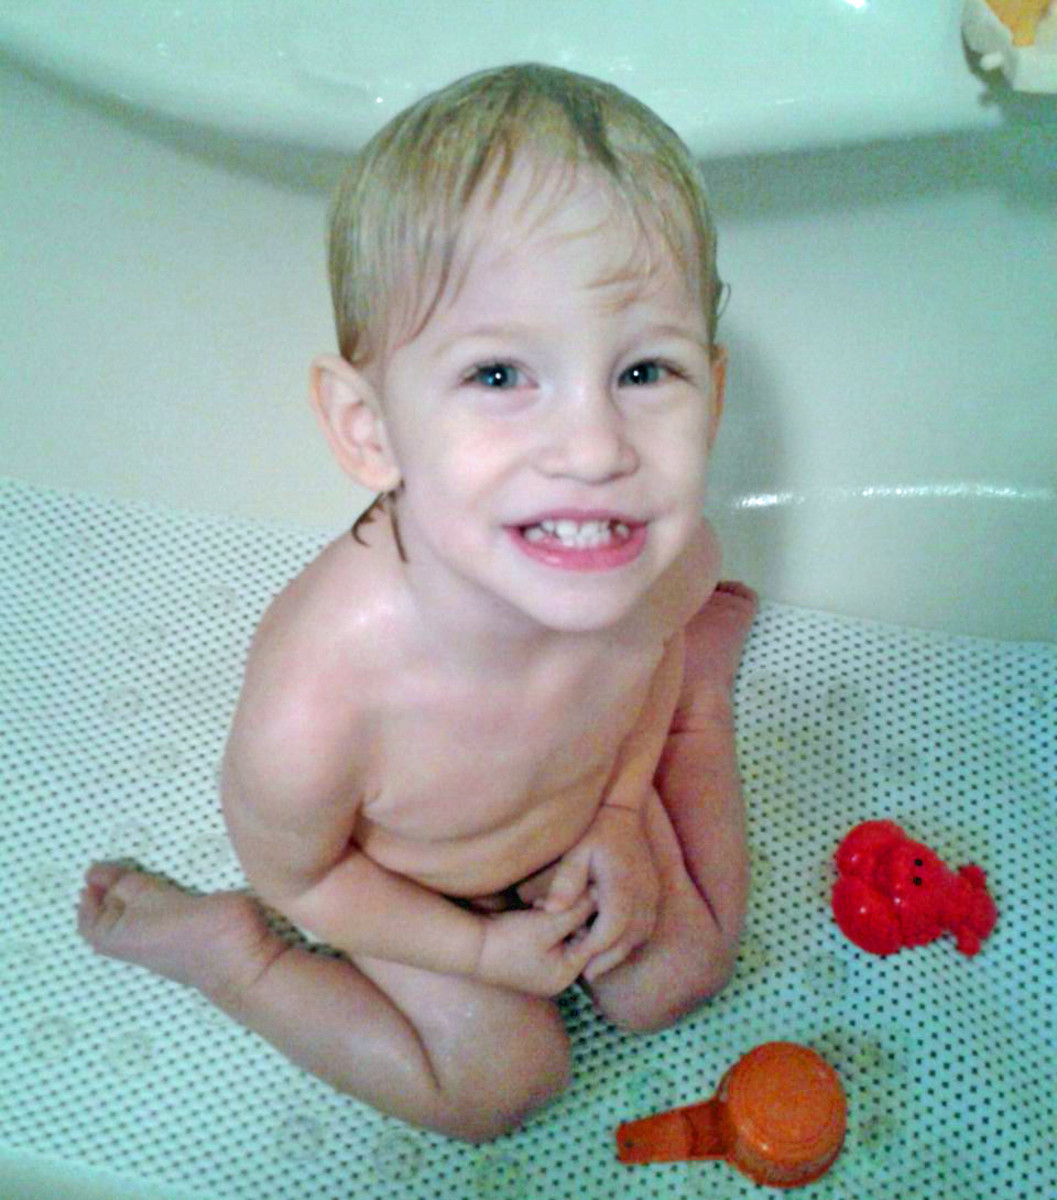 My toddler after his rash-eliminating bathtub soak. See, much happier! (Ignore the forced smile... I promise, he's happy.)